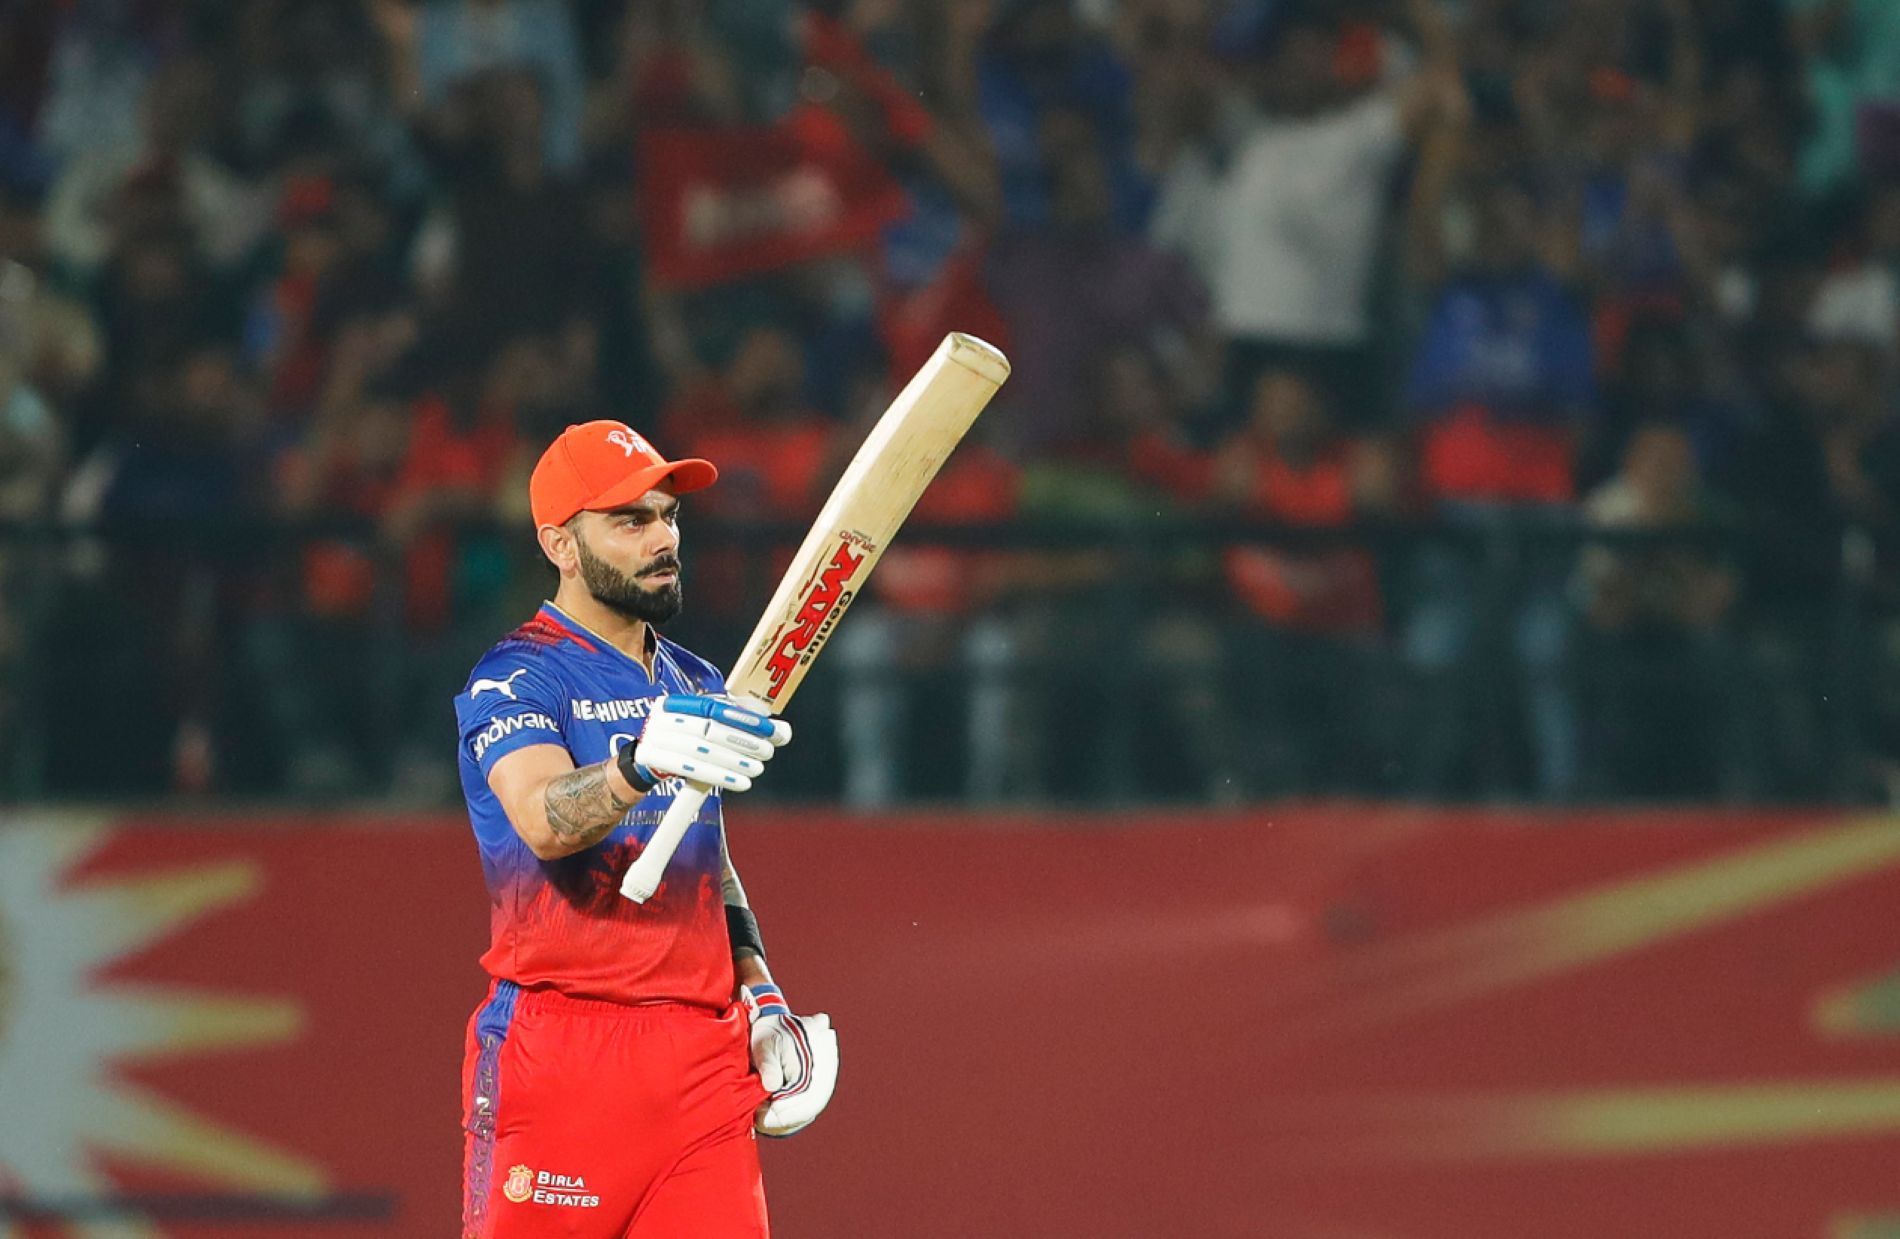 Kohli has received criticism for his strike rate in the middle overs during this IPL [Credit: IPL Twitter handle]